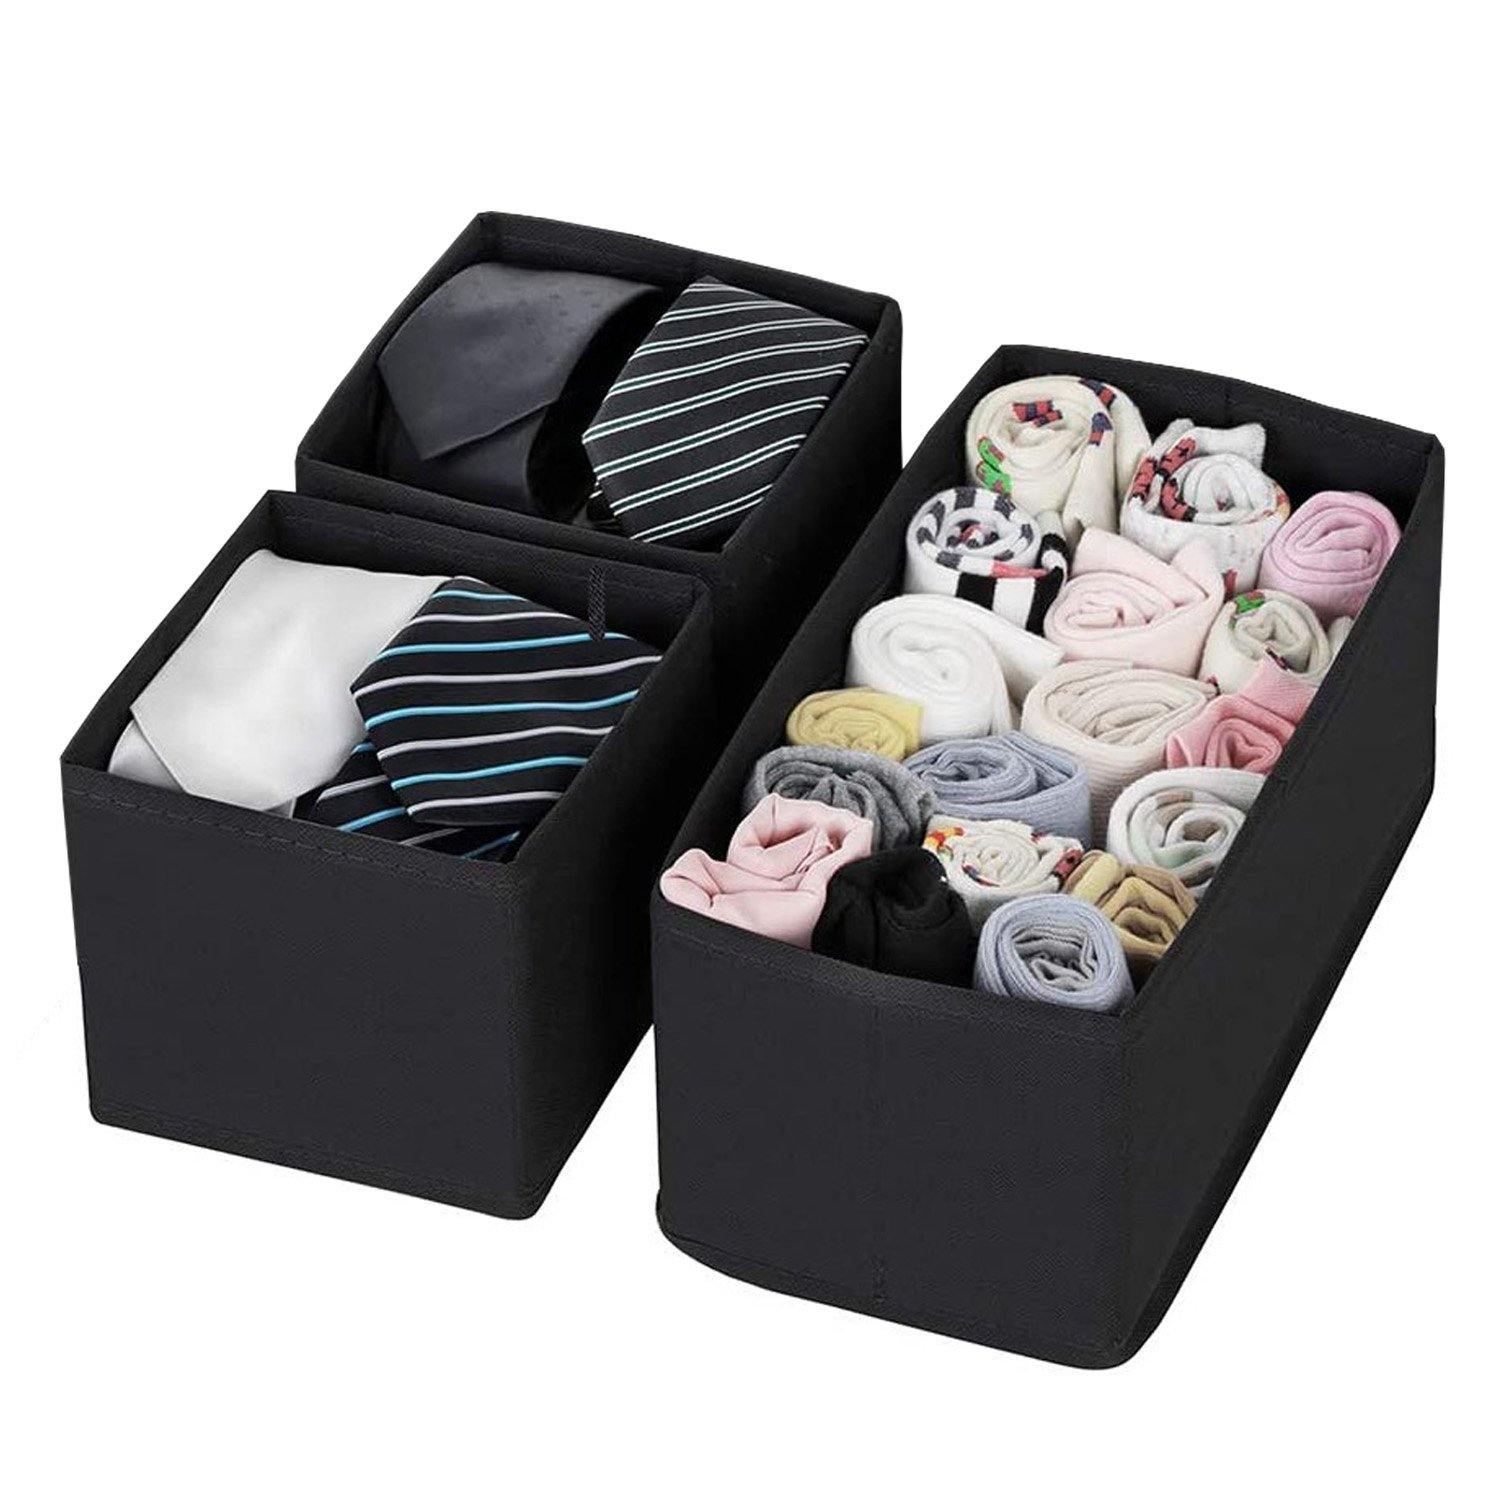 DOUBLE R BAGS No Smell Foldable Cloth Storage Cube with Drawers for Underwear Bras Socks Ties Scarves Set of 3 (Black) - Double R Bags